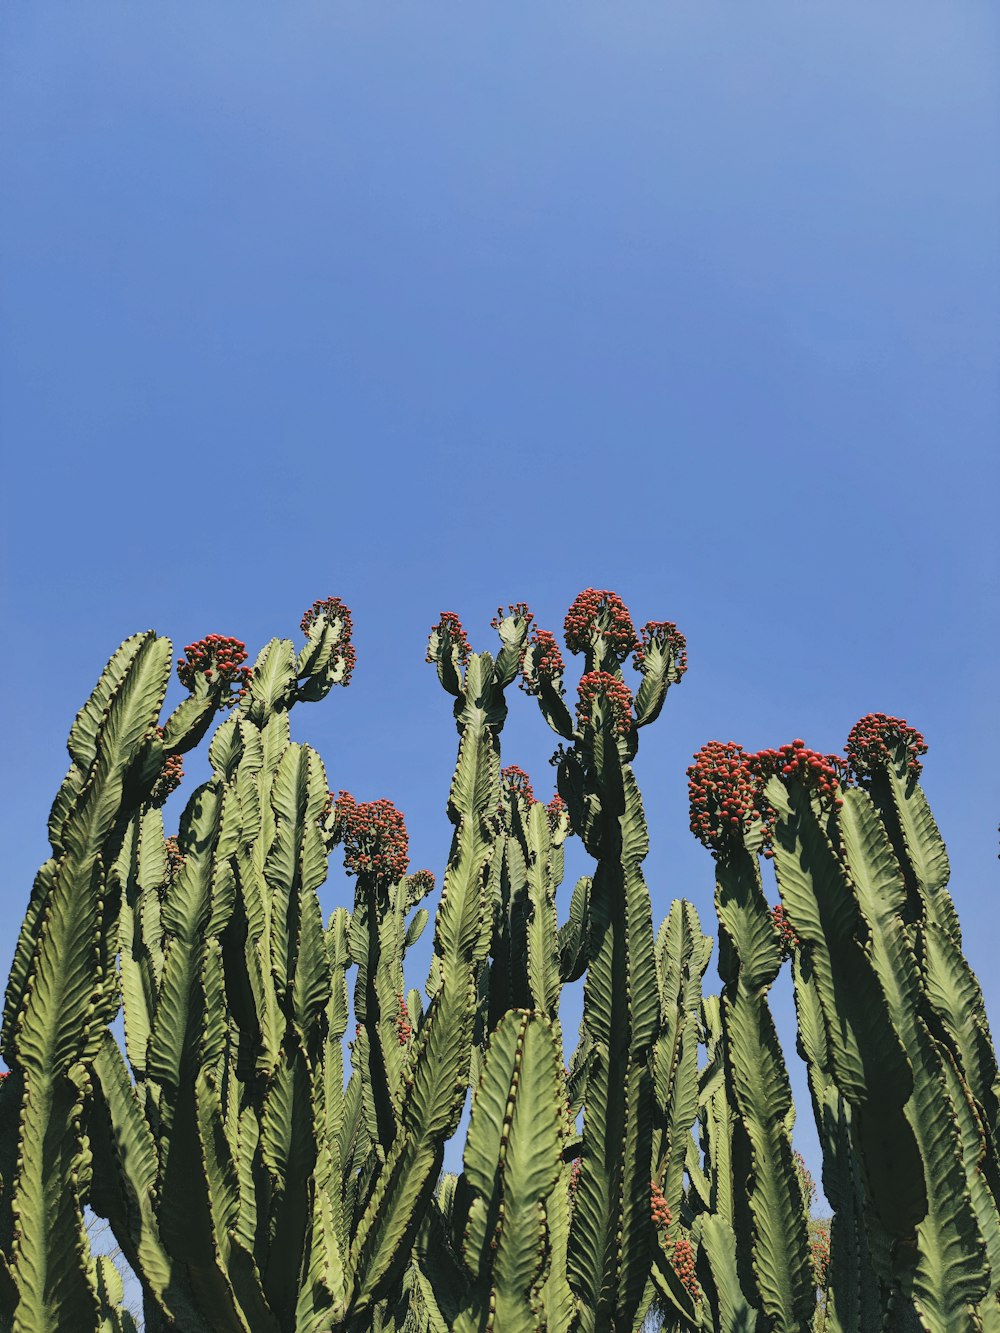 a large green cactus with red flowers in front of a blue sky